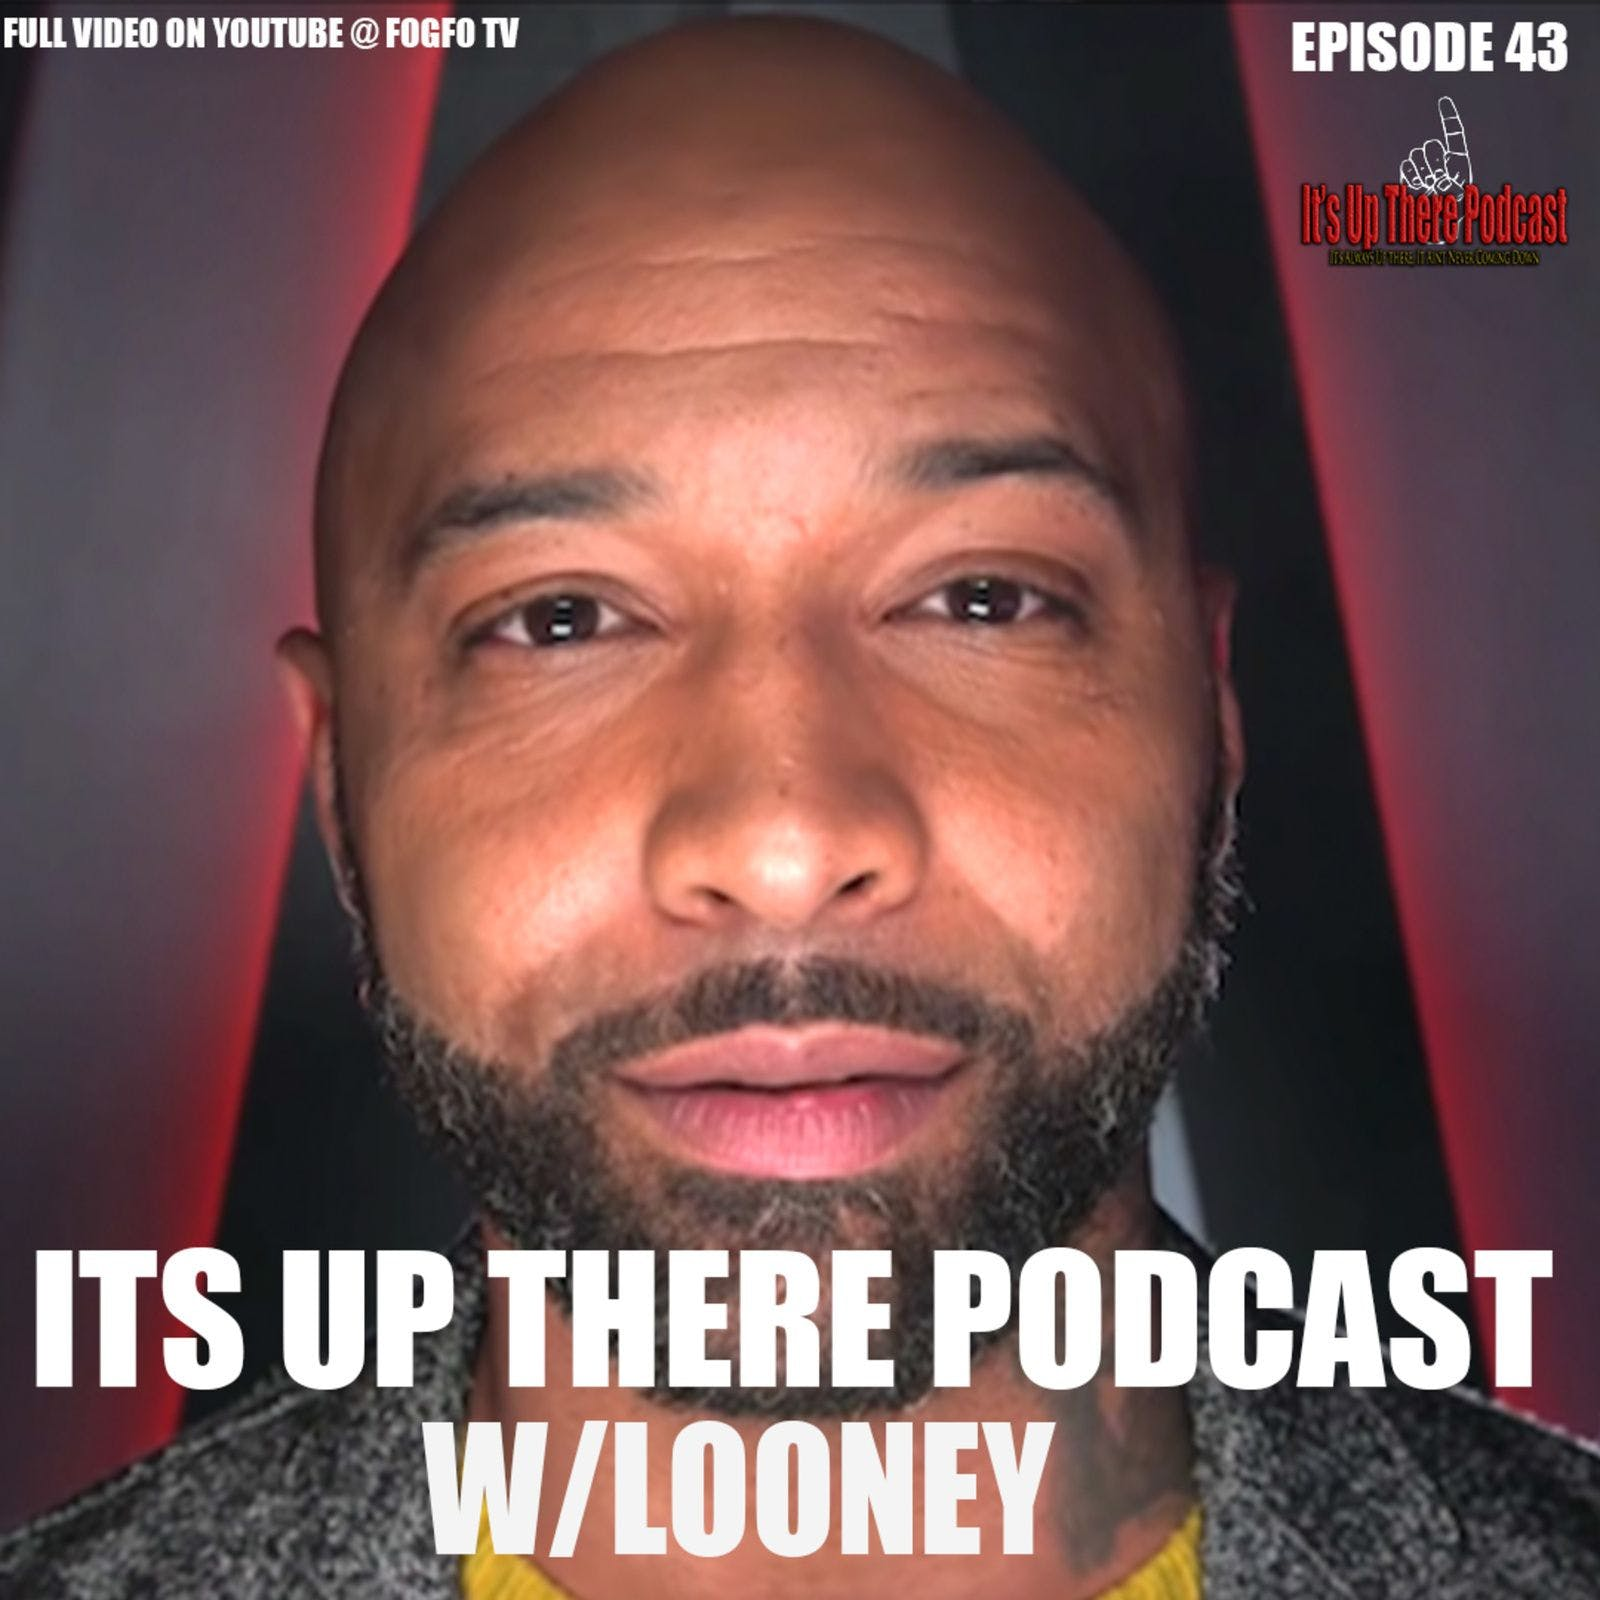 ITS UP THERE PODCAST EP 43 | JOE BUDDEN PODCAST PAST AND FUTURE | MASTER P MOVES TO NASHVILLE HBCU | PPP FRAUD TRICKS | CANDACE OWNES ON THE WHITE SIDE OF THINGS | ADRIEN BRONER TWEETS SUICIDAL 